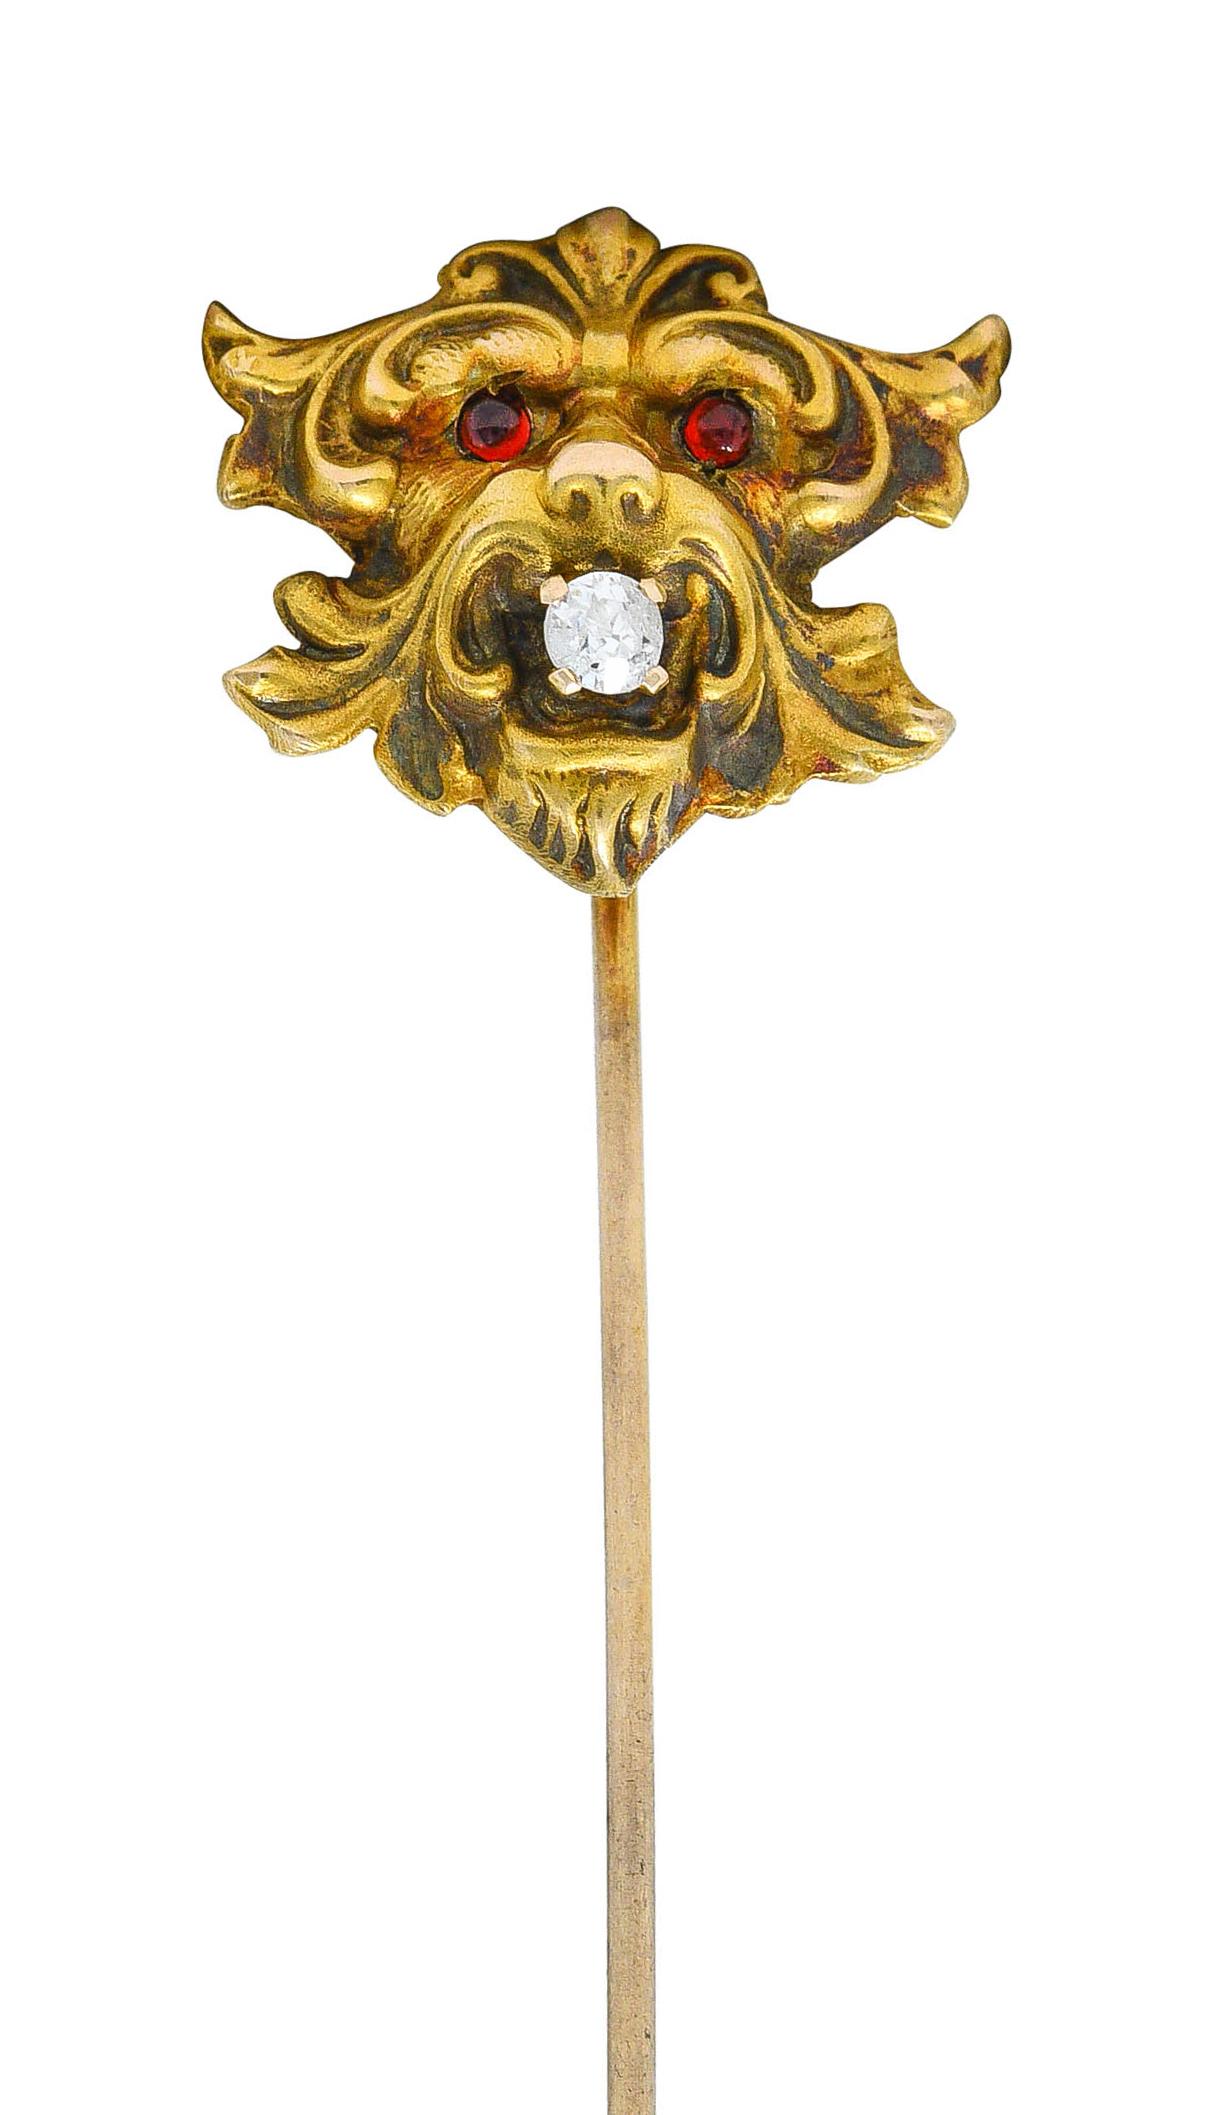 Depicting a stylized whiplash lion

With bright red garnet cabochon eyes

And an old European cut diamond clutched in its jaw

Eye clean and white while weighing approximately 0.05 carat

Lion tested as 14 karat gold while pin stem is stamped for 10